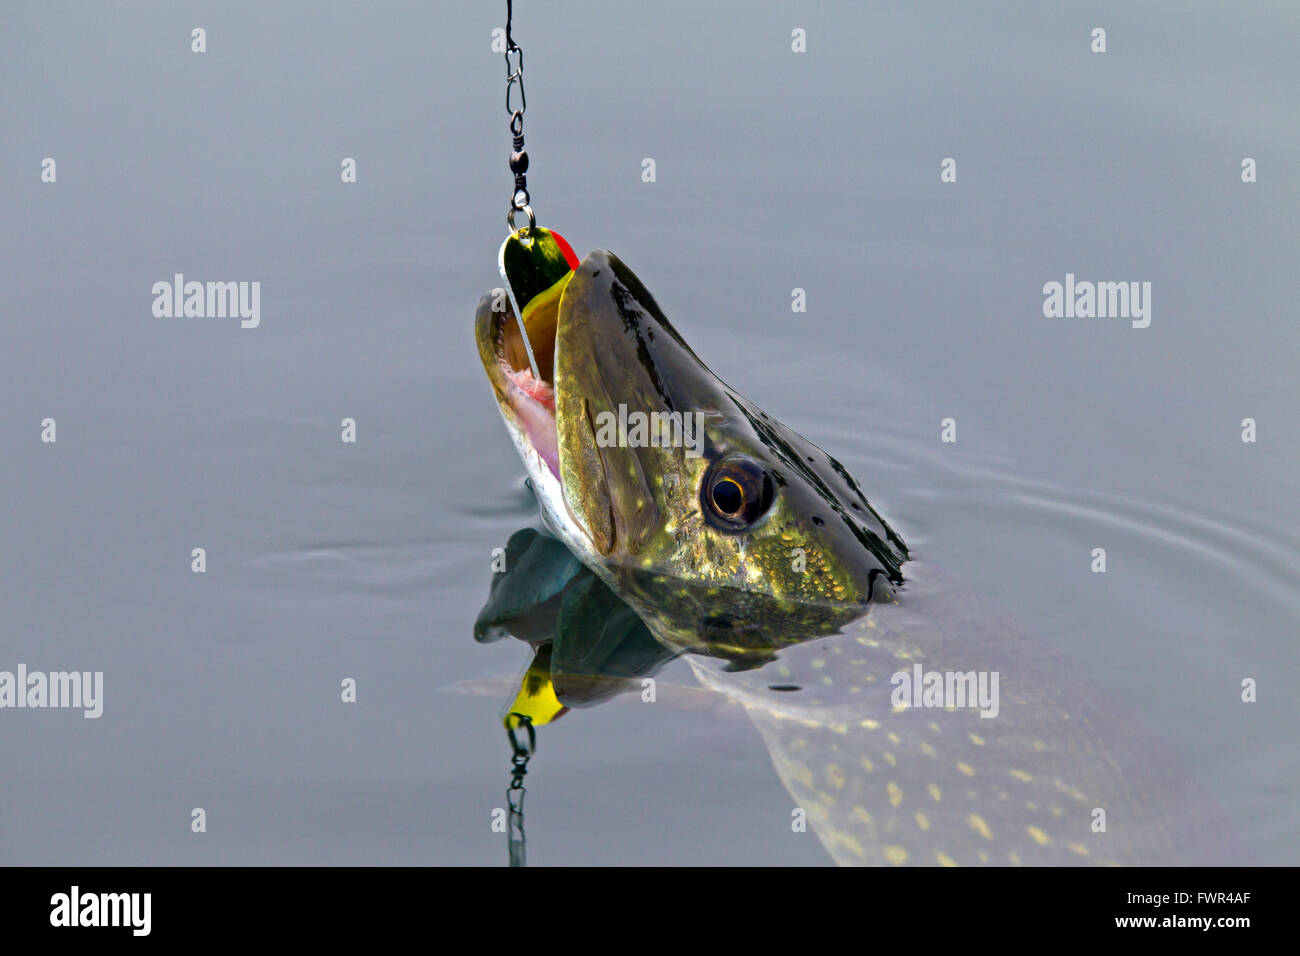 Hooked Northern pike (Esox lucius) in lake caught with lure on a